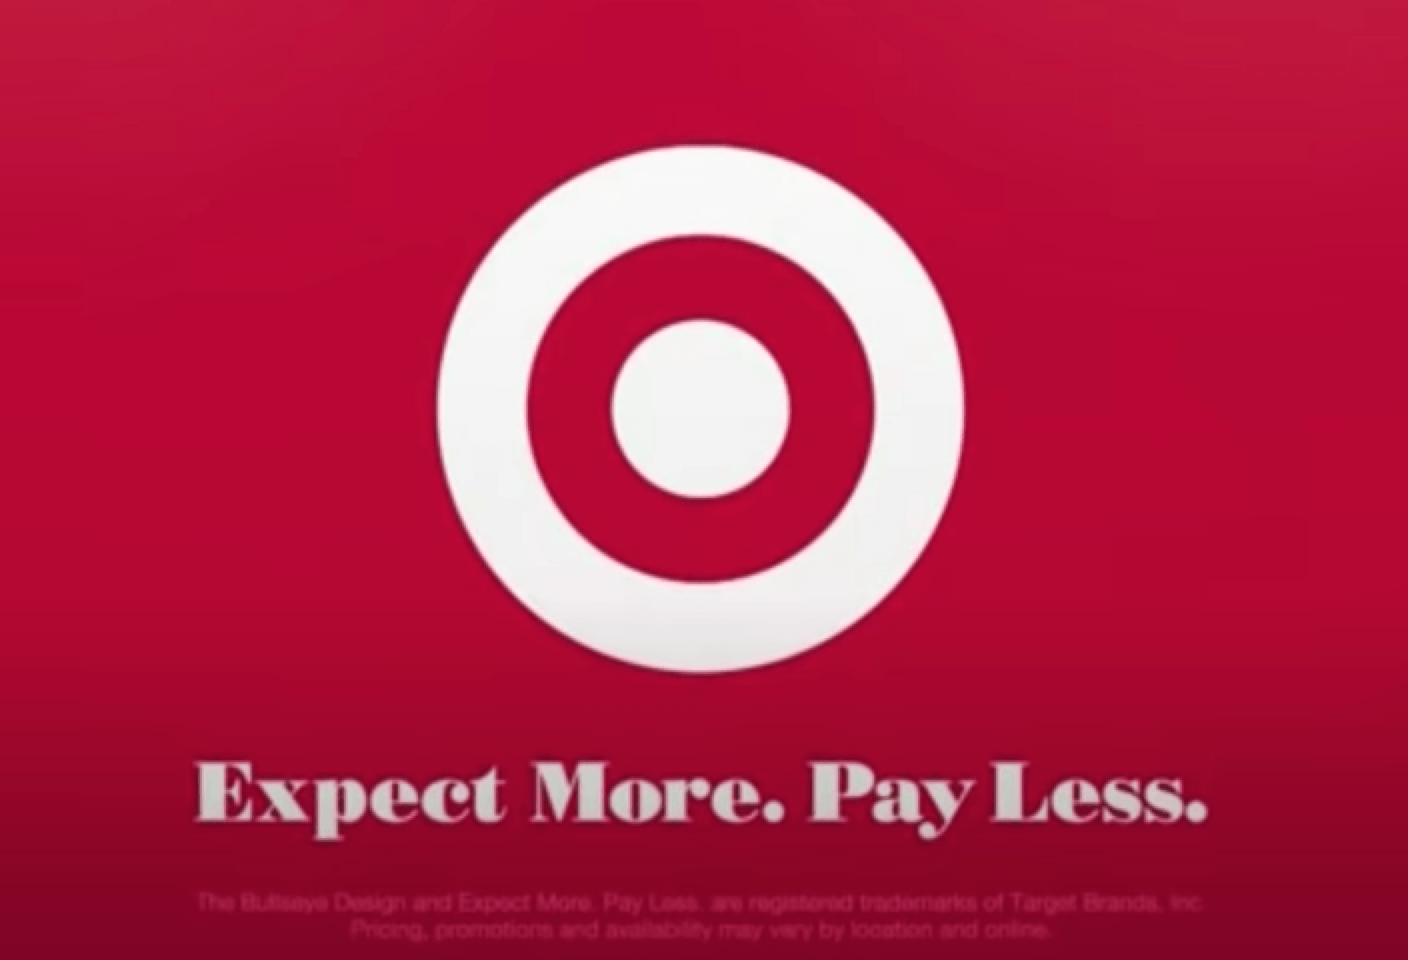 dave eckert share target expect more pay less photos